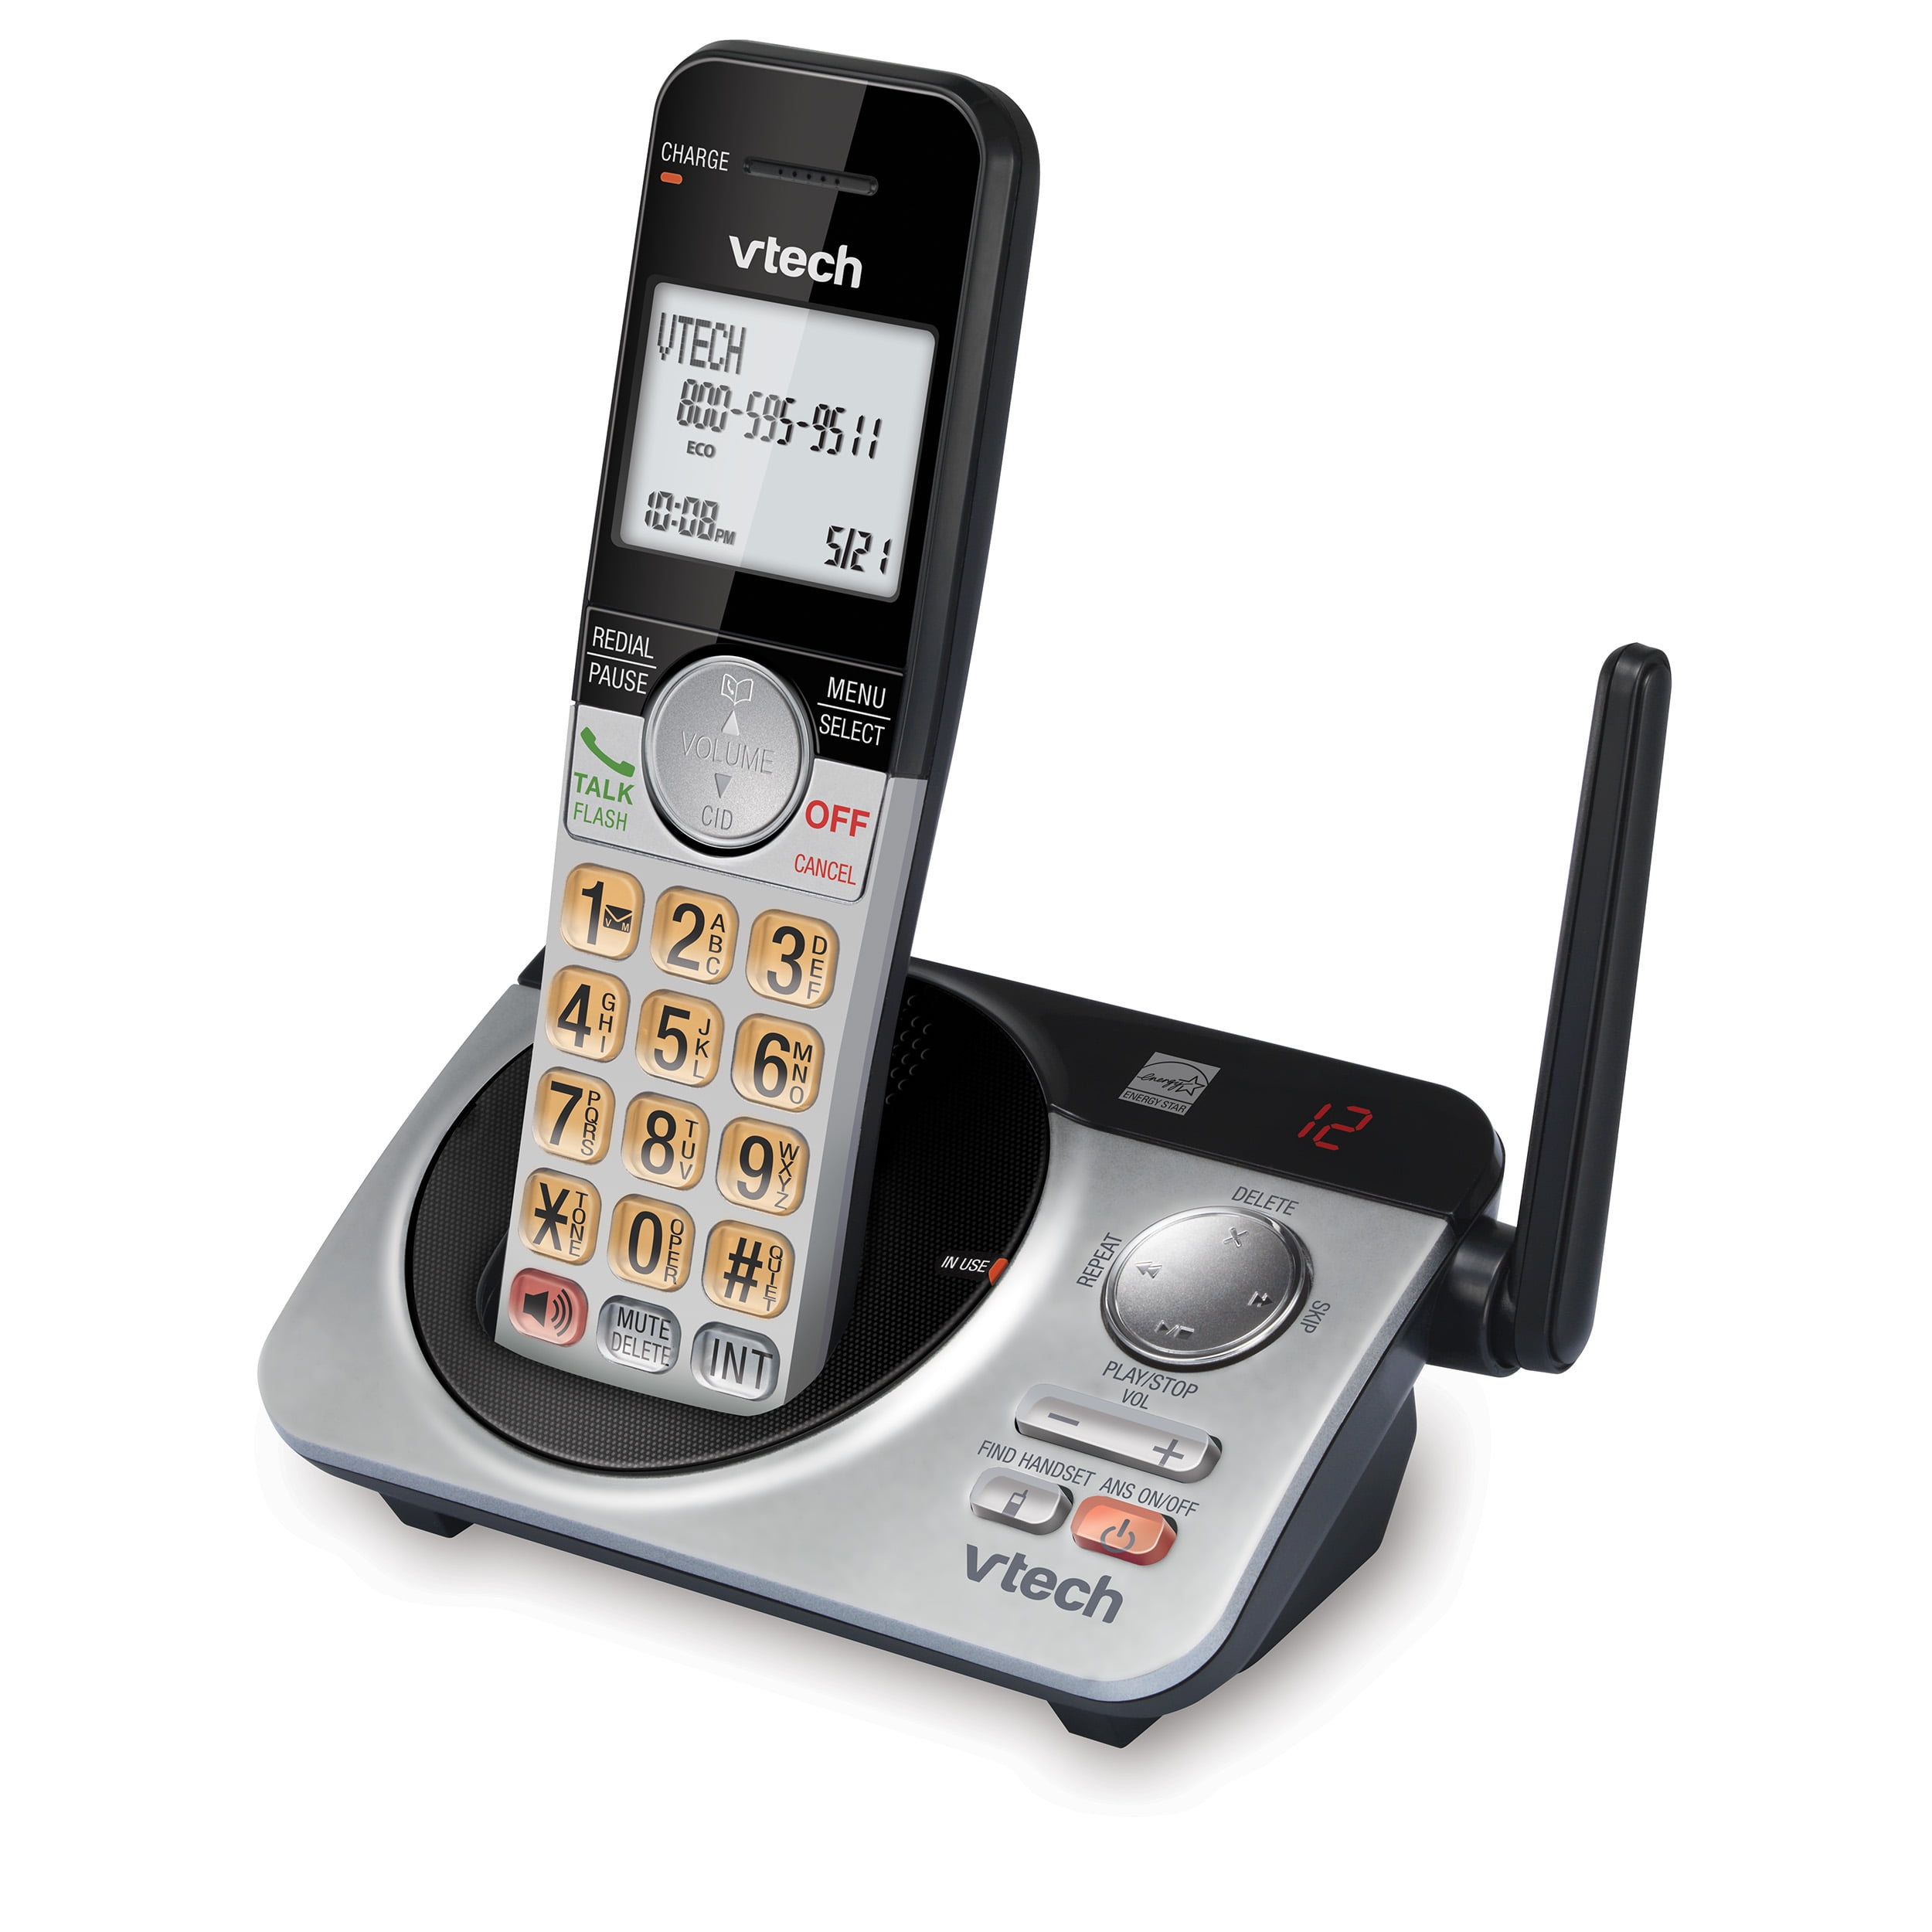 VTech CS5229 DECT 6.0 Extended Range Cordless Phone with Answering System  (Silver/Black)